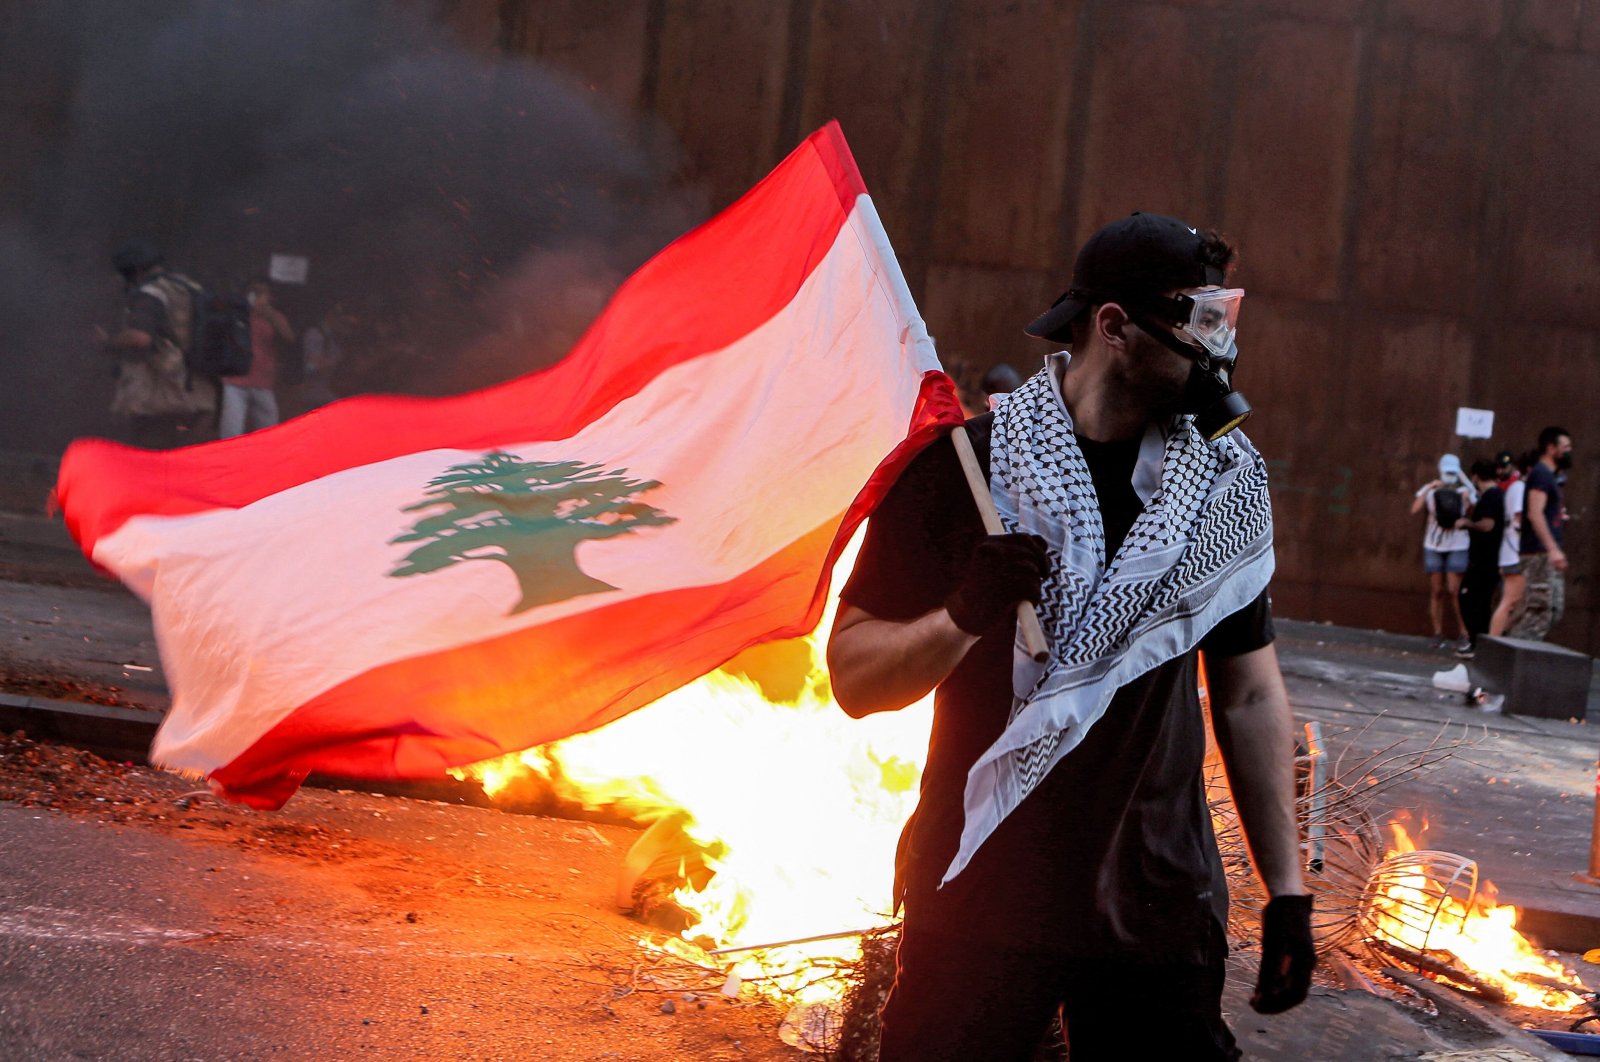 A protester stands with a Lebanese national flag during clashes with army and security forces near the Lebanese parliament headquarters in the center of the capital Beirut, Lebanon on Aug. 4, 2021. (AFP Photo)